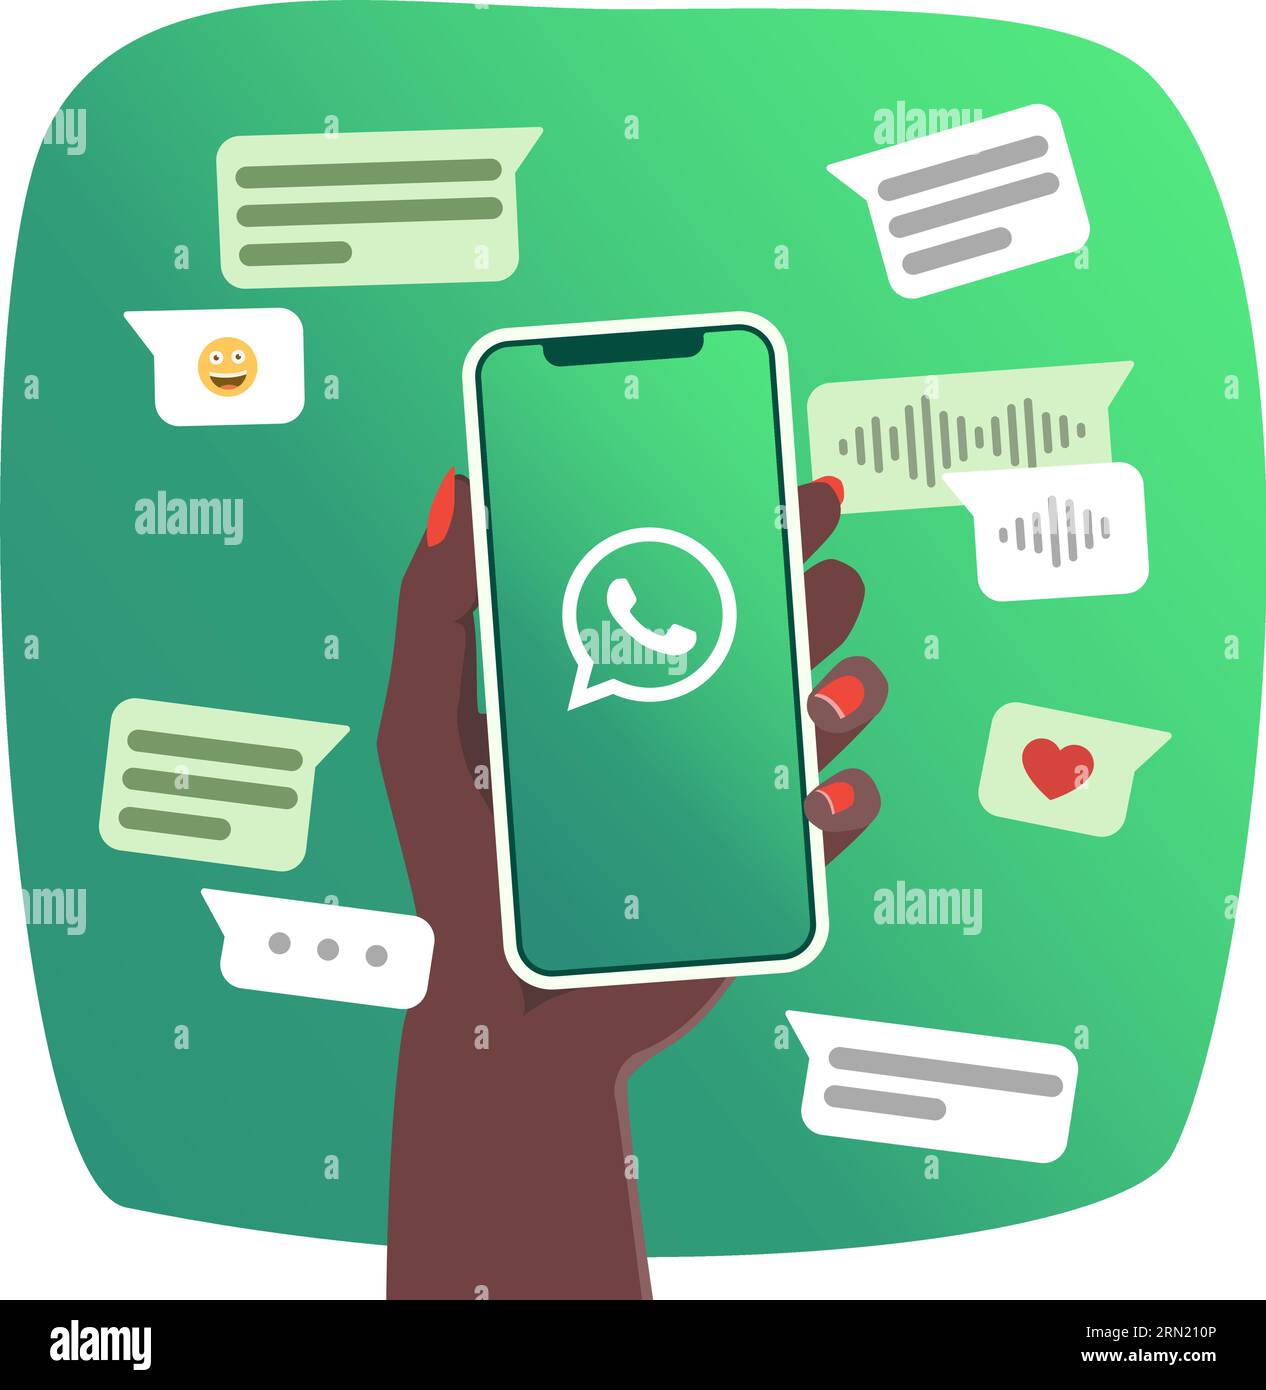 Hand of woman holding smartphone with Whatsapp logo in the screen. Chat communication elements. Vector illustration. Flat colors. Stock Vector